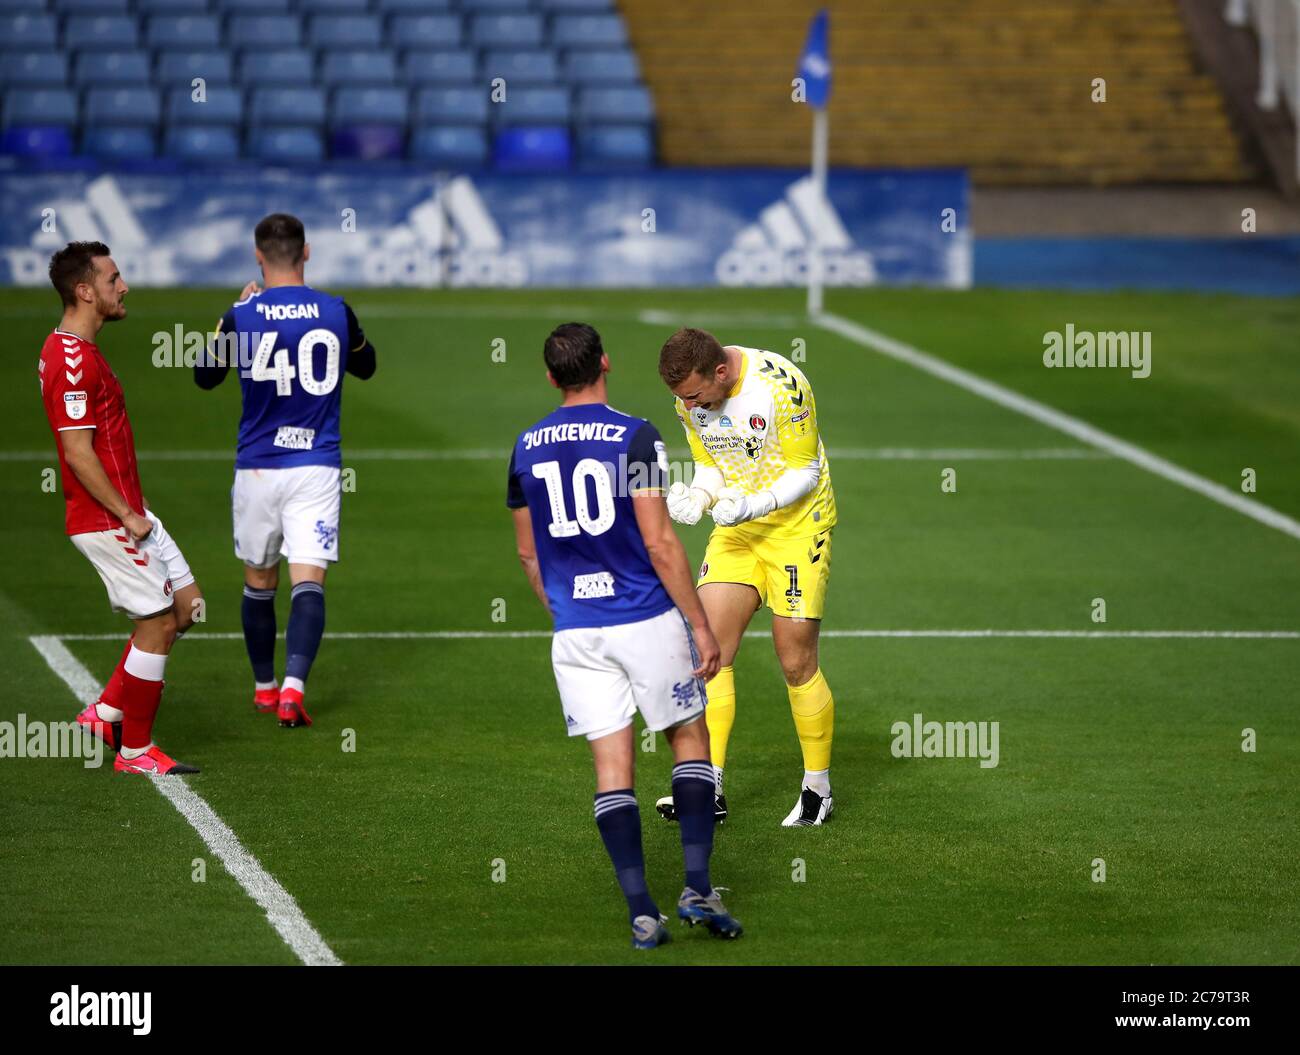 Charlton Athletic goalkeeper Dillon Phillips celebrates after saving a penalty from Birmingham City's Scott Hogan (second left) during the Sky Bet Championship match at St Andrew's Trillion Trophy Stadium, Birmingham. Stock Photo